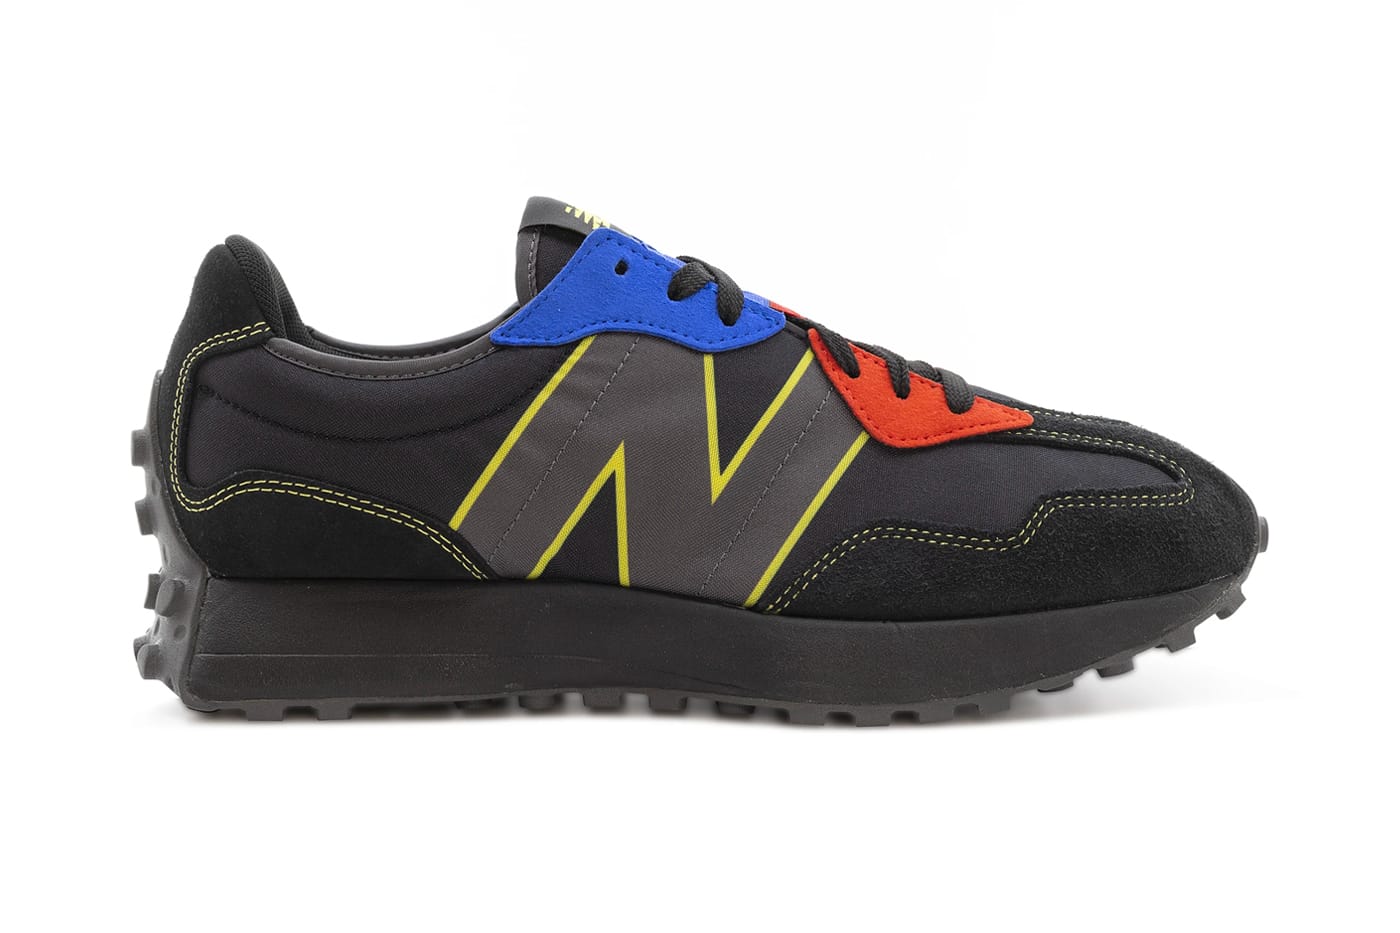 New Balance 327 in Black & Multi-Color Release | HYPEBEAST